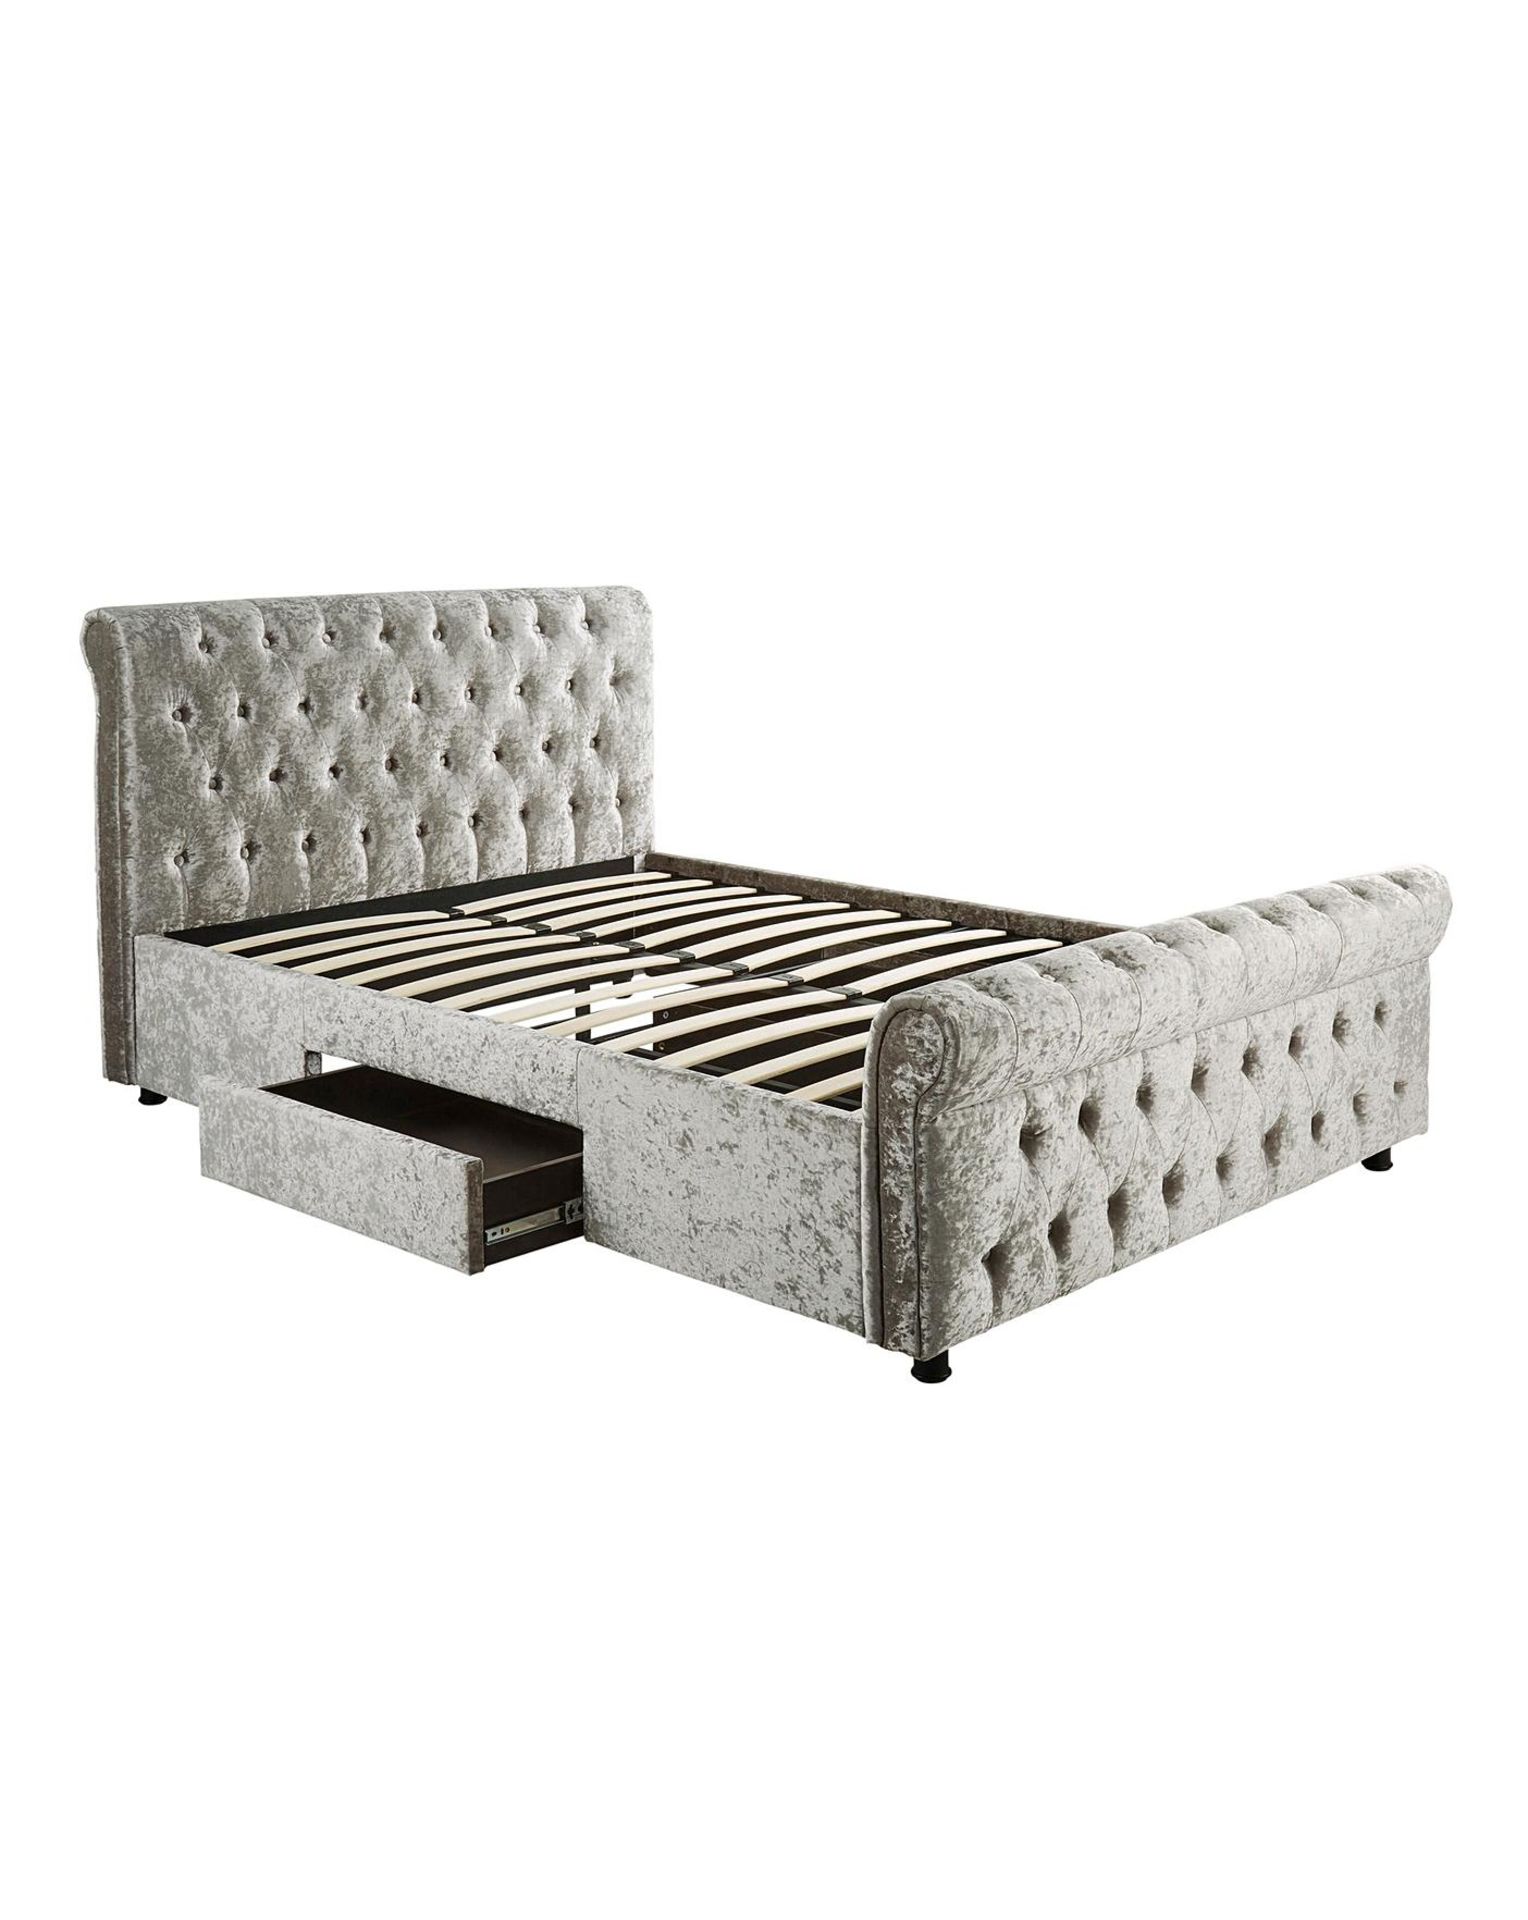 NEW & BOXED KINGSTON Crushed Velvet Bed Frame with 2 Storage Drawers - SILVER. RRP £549. The - Image 3 of 3